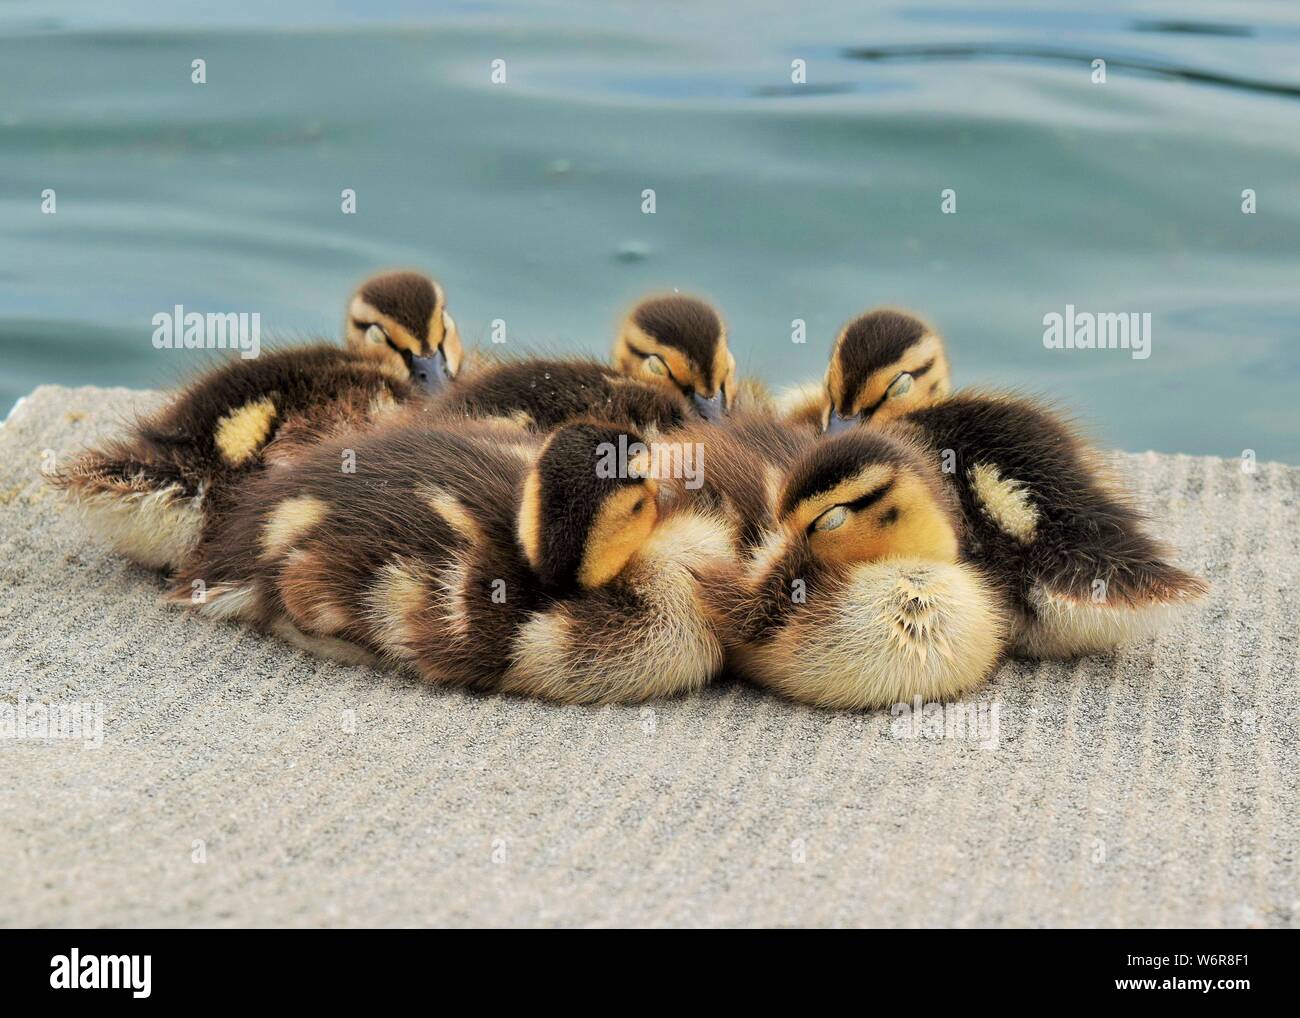 Baby ducklings resting together near water Stock Photo